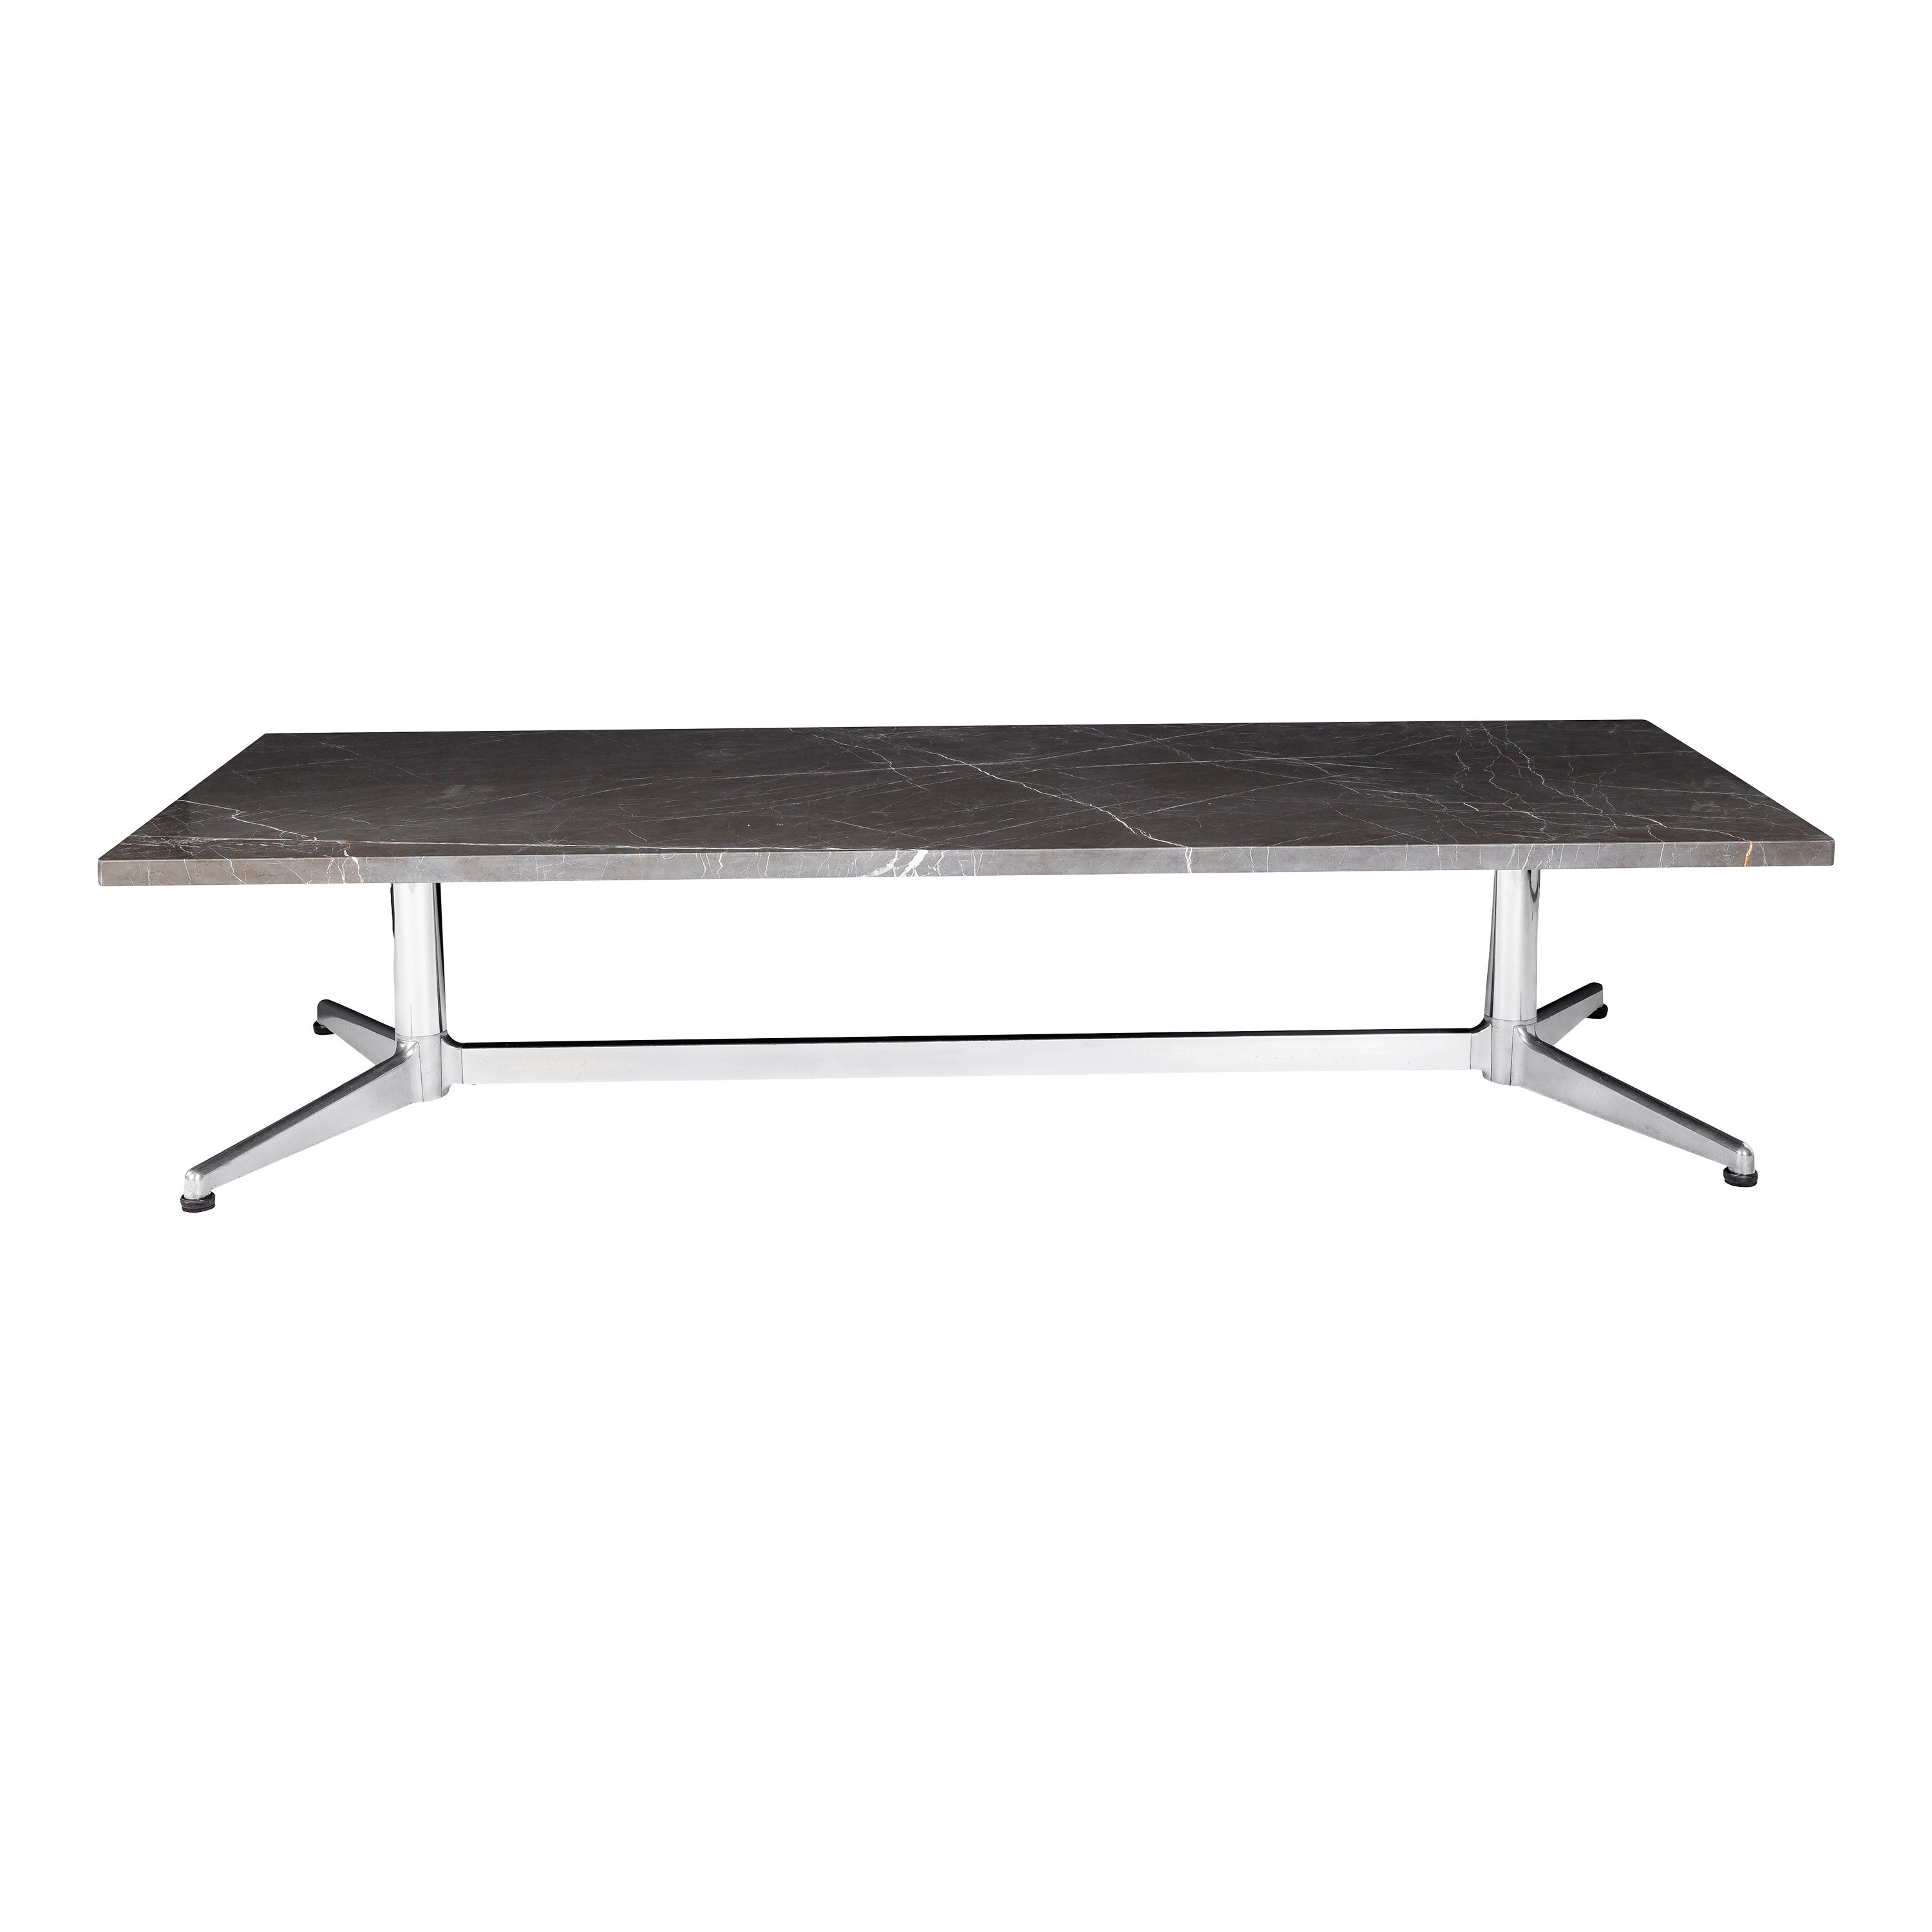 Chrome Frame Coffee Table w/ Leathered Pietra Grey Top